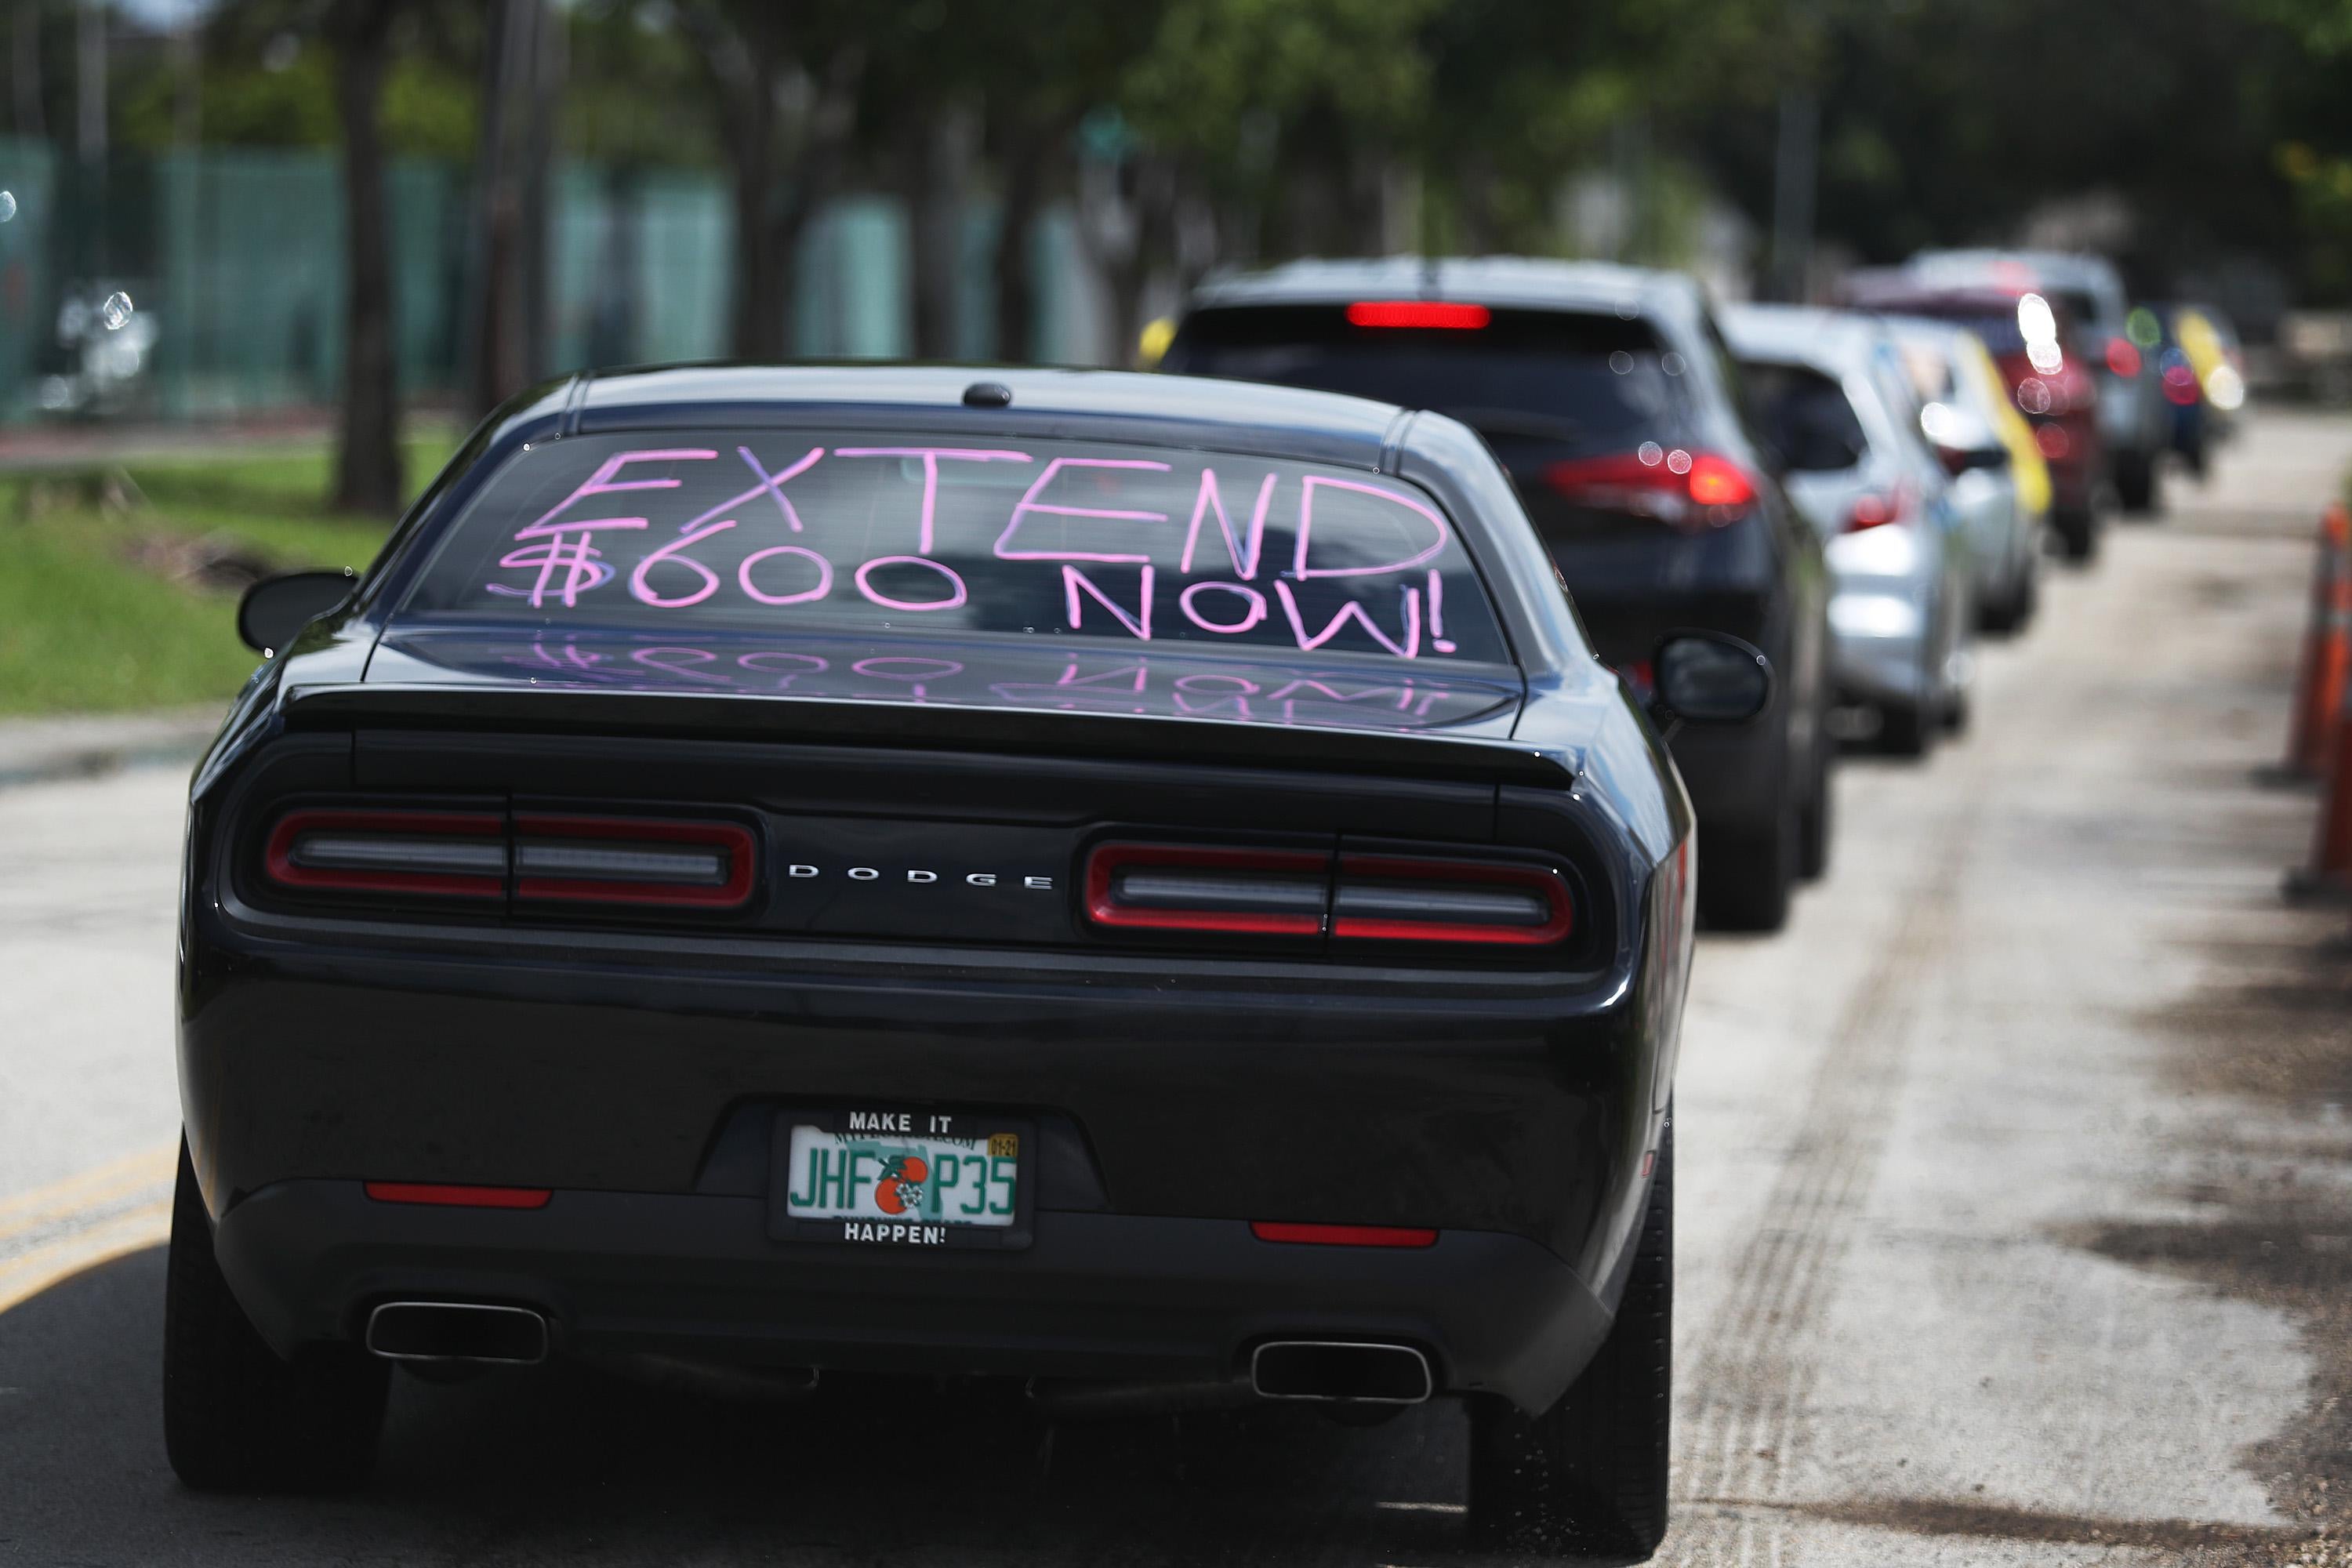 MIAMI SPRINGS, FLORIDA - JULY 16: A car with, ' extend $600 now!', written on the rear window participates in a caravan protest on July 16, 2020 in Miami Springs, Florida.  The caravan was driving to the Coral Gables office of Sen. Rick Scott to ask him and other Senators to support the new Schumer/Wyden legislation that extends unemployment benefits for all laid-off Americans as the coronavirus pandemic continues to disrupt the economy.  (Photo by Joe Raedle/Getty Images)